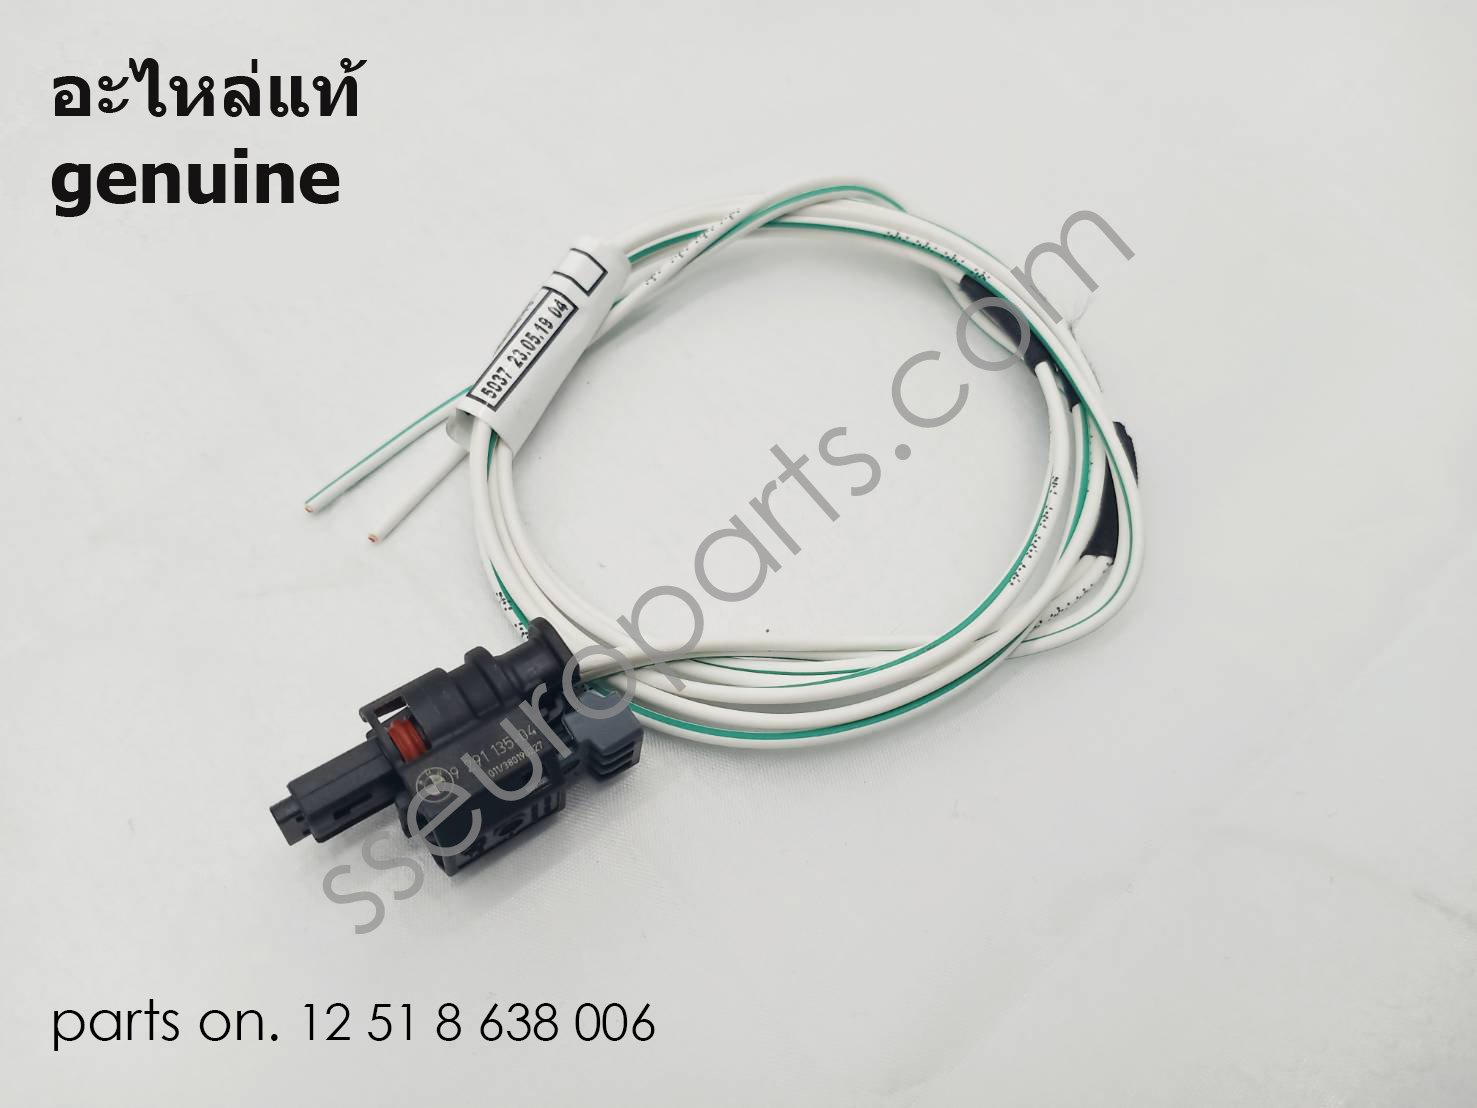 Adapter Part number: 12518638006 8638006